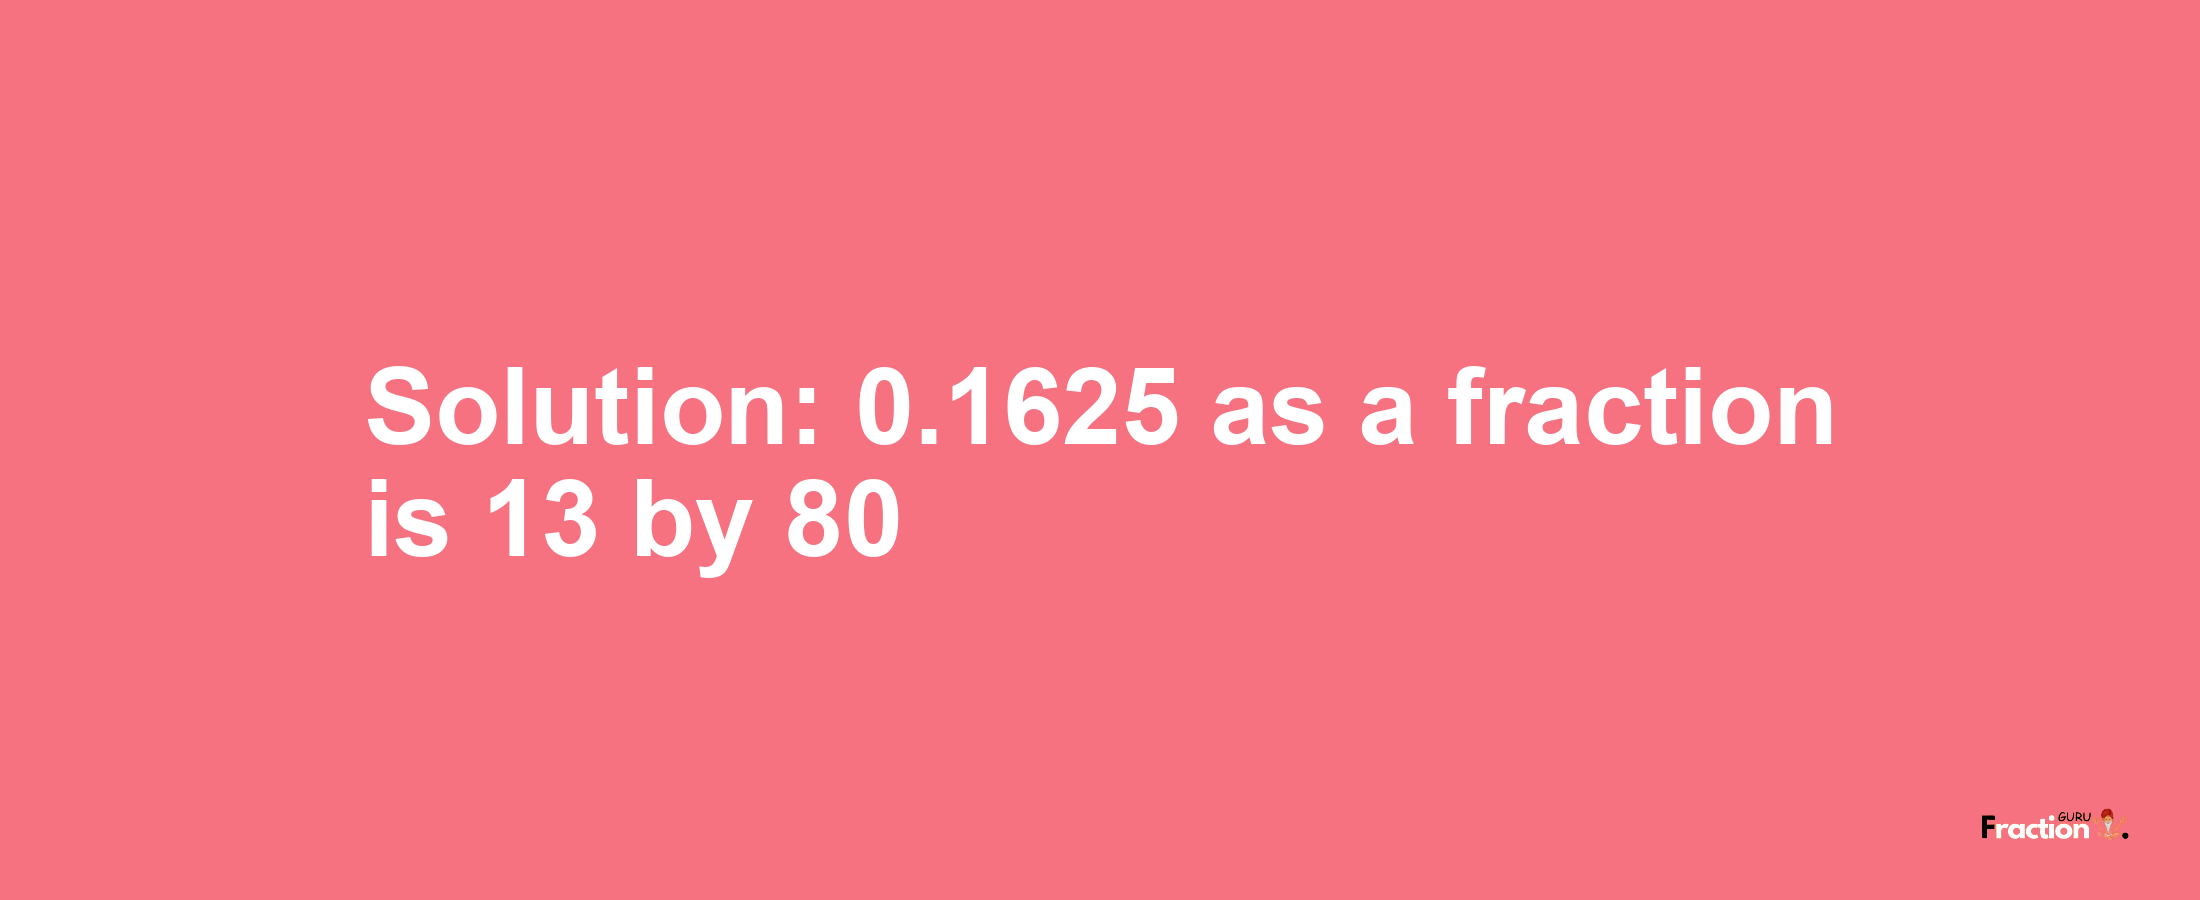 Solution:0.1625 as a fraction is 13/80